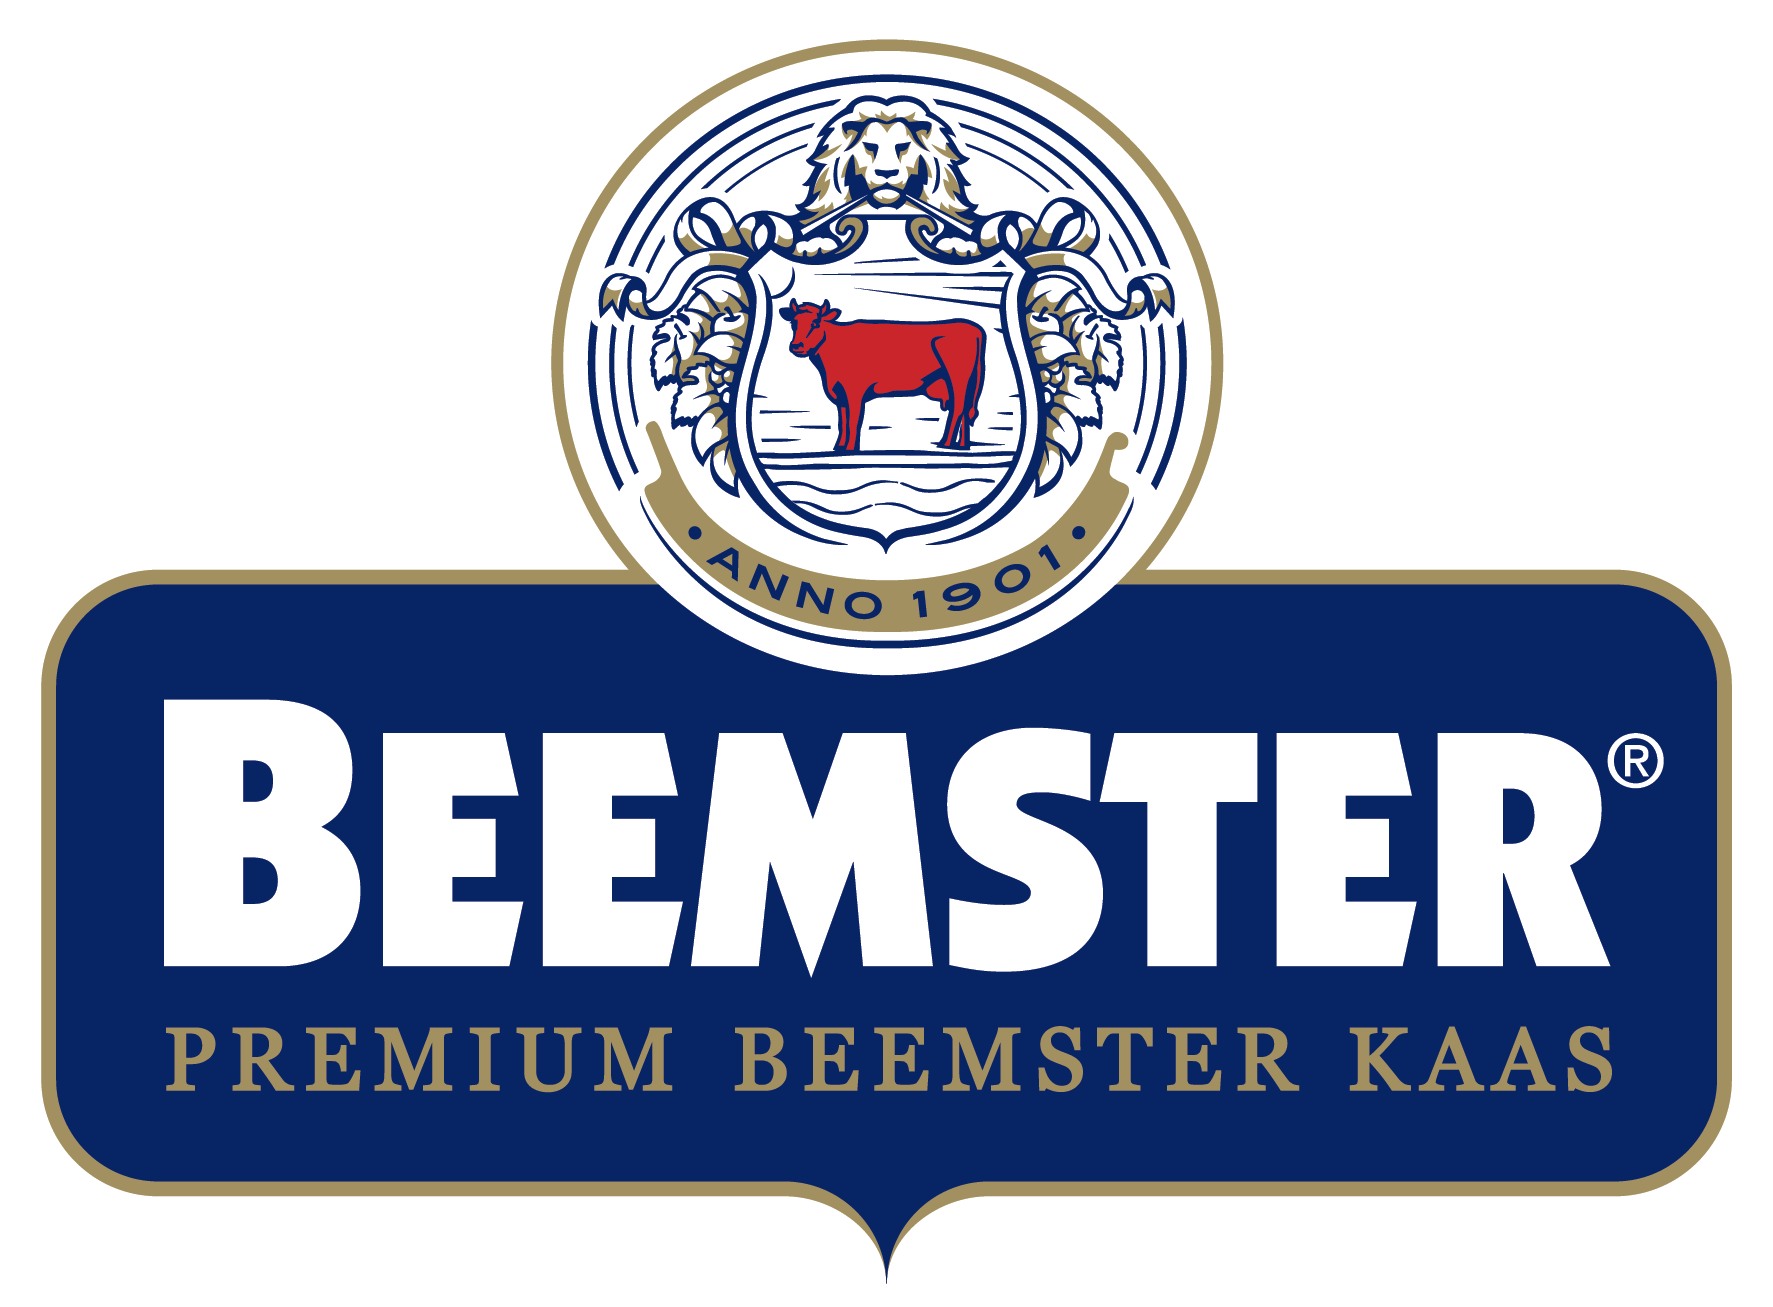 Beemster cheese